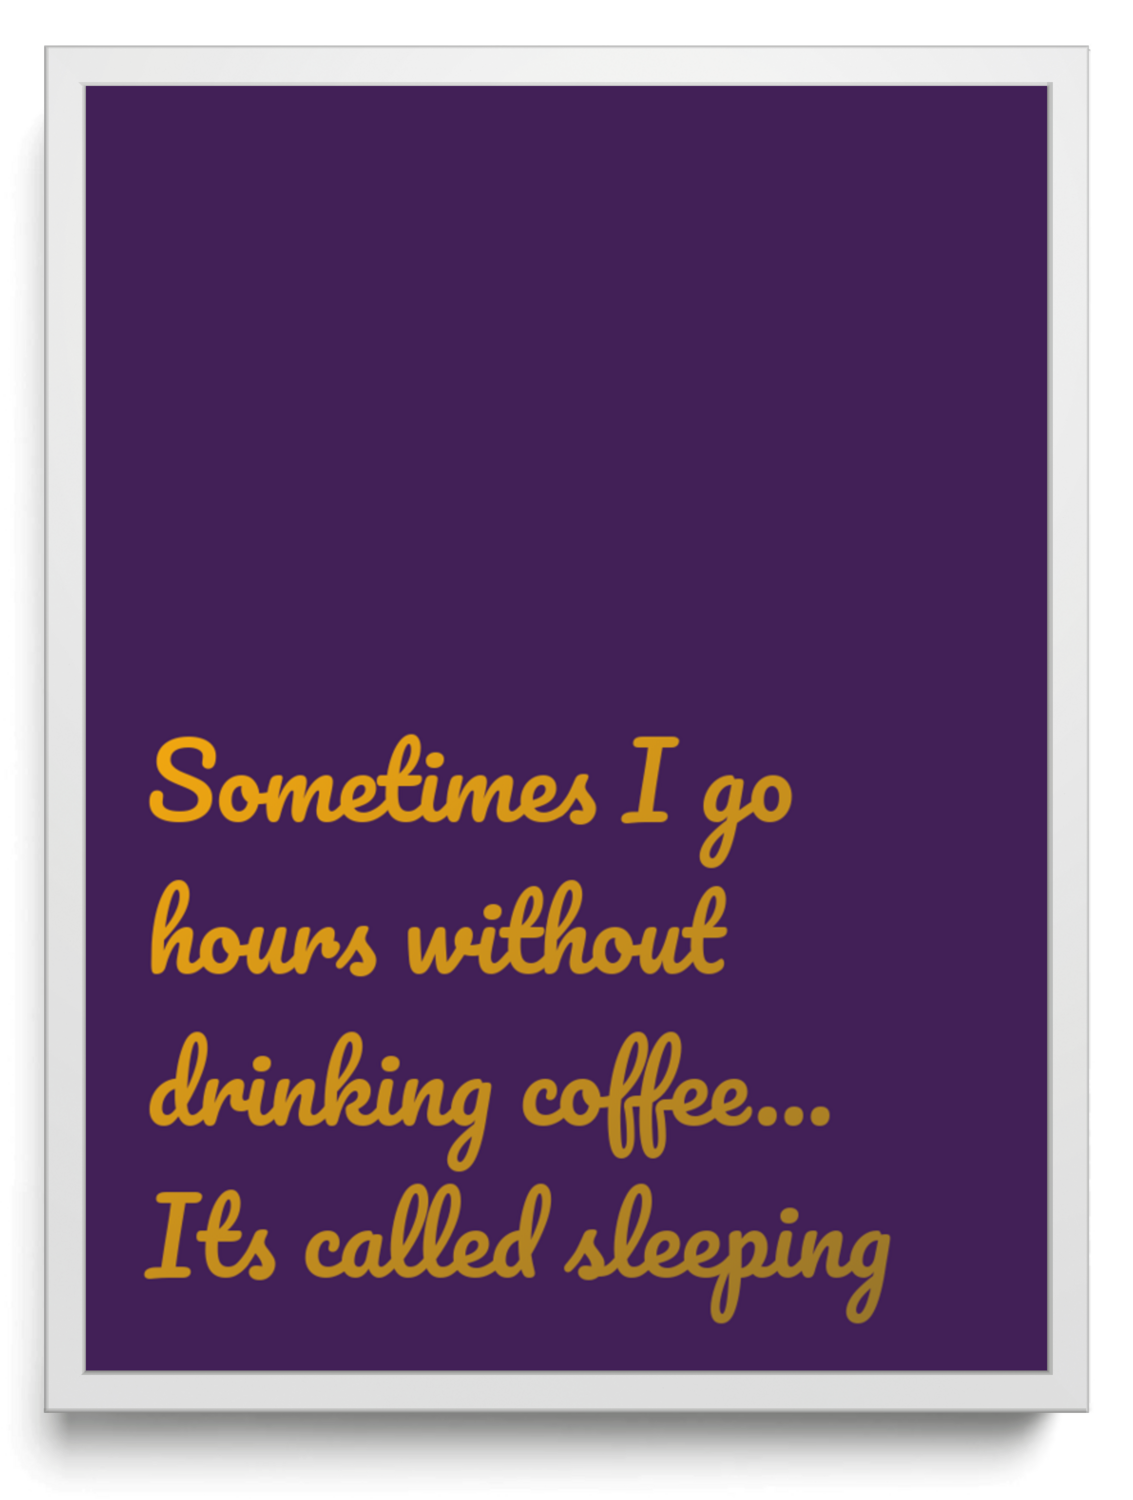 Sometimes I go hours without drinking coffee... Its called sleeping framed typographic print